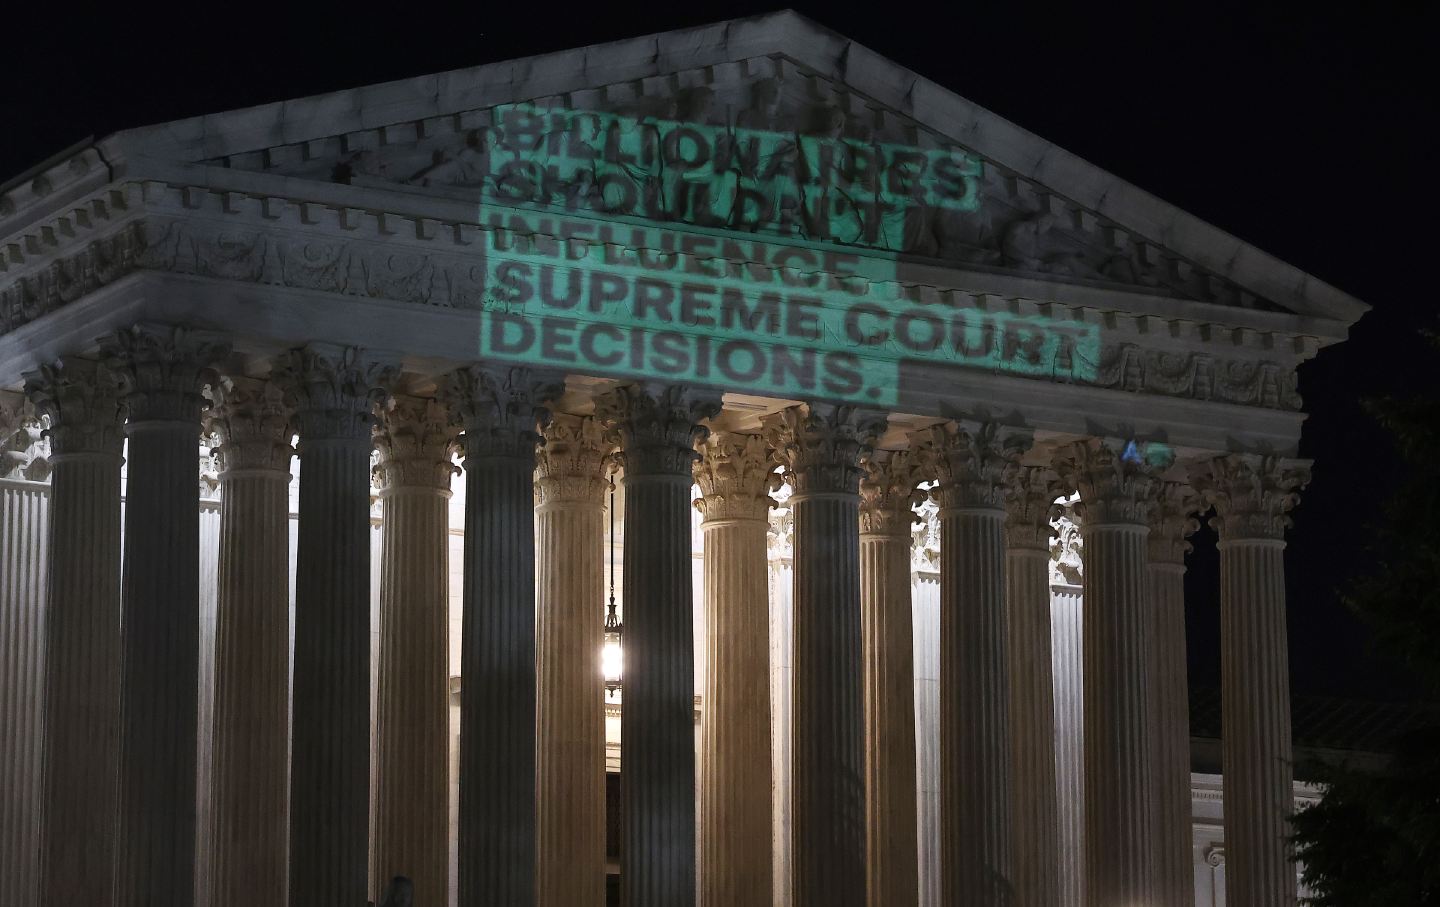 Government watchdog Accountable.US shines a light on the facade of the Supreme Court Building as part of a campaign calling attention to corruption on the court.